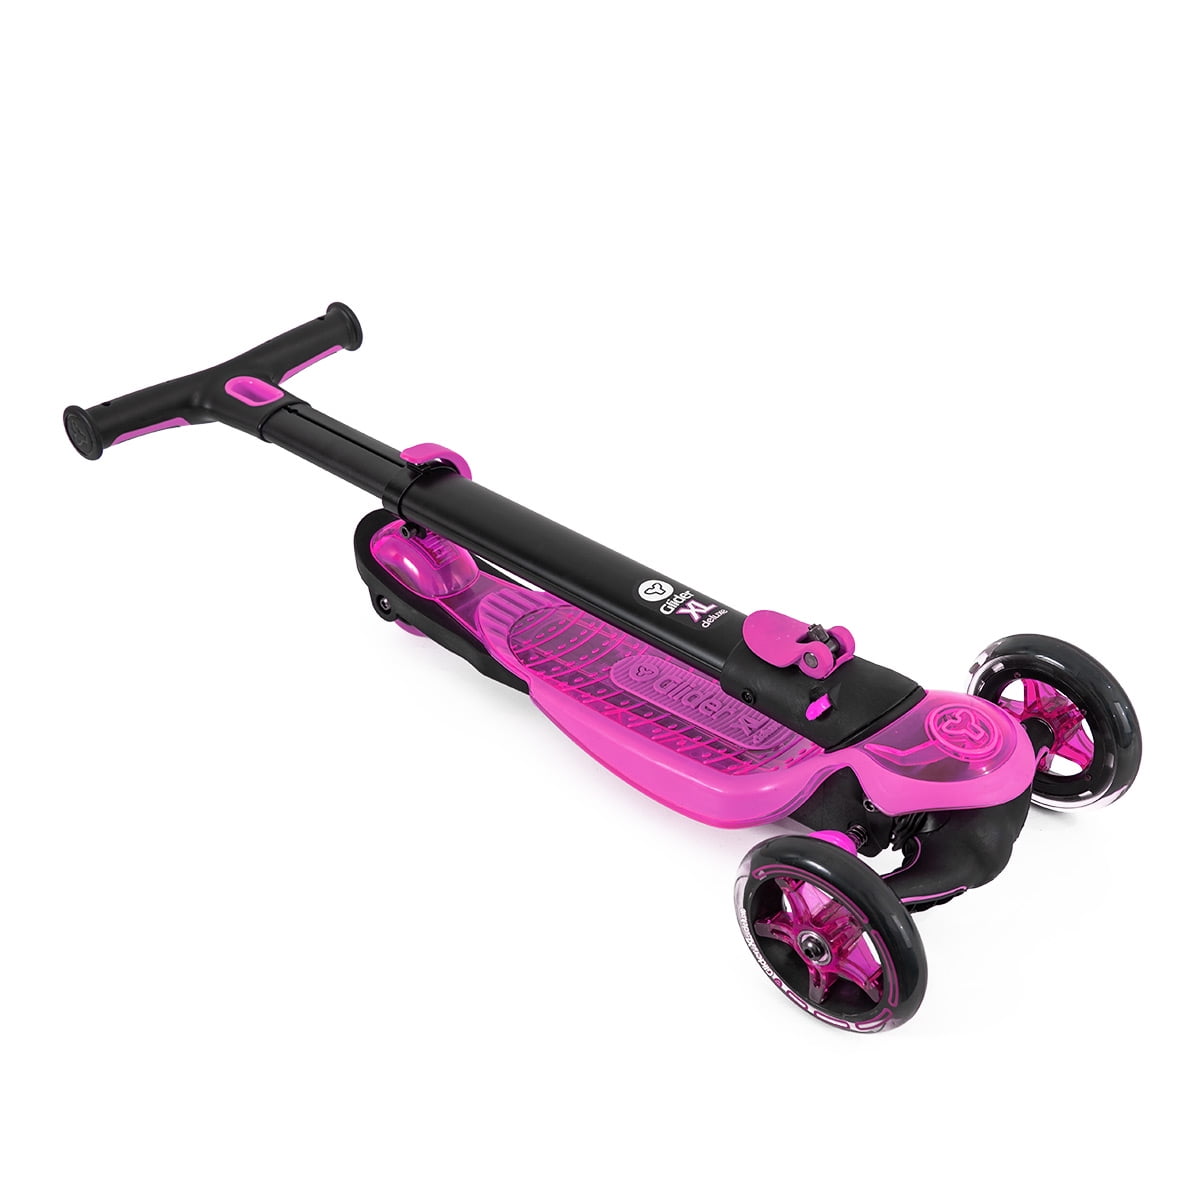 y glider deluxe scooter pink